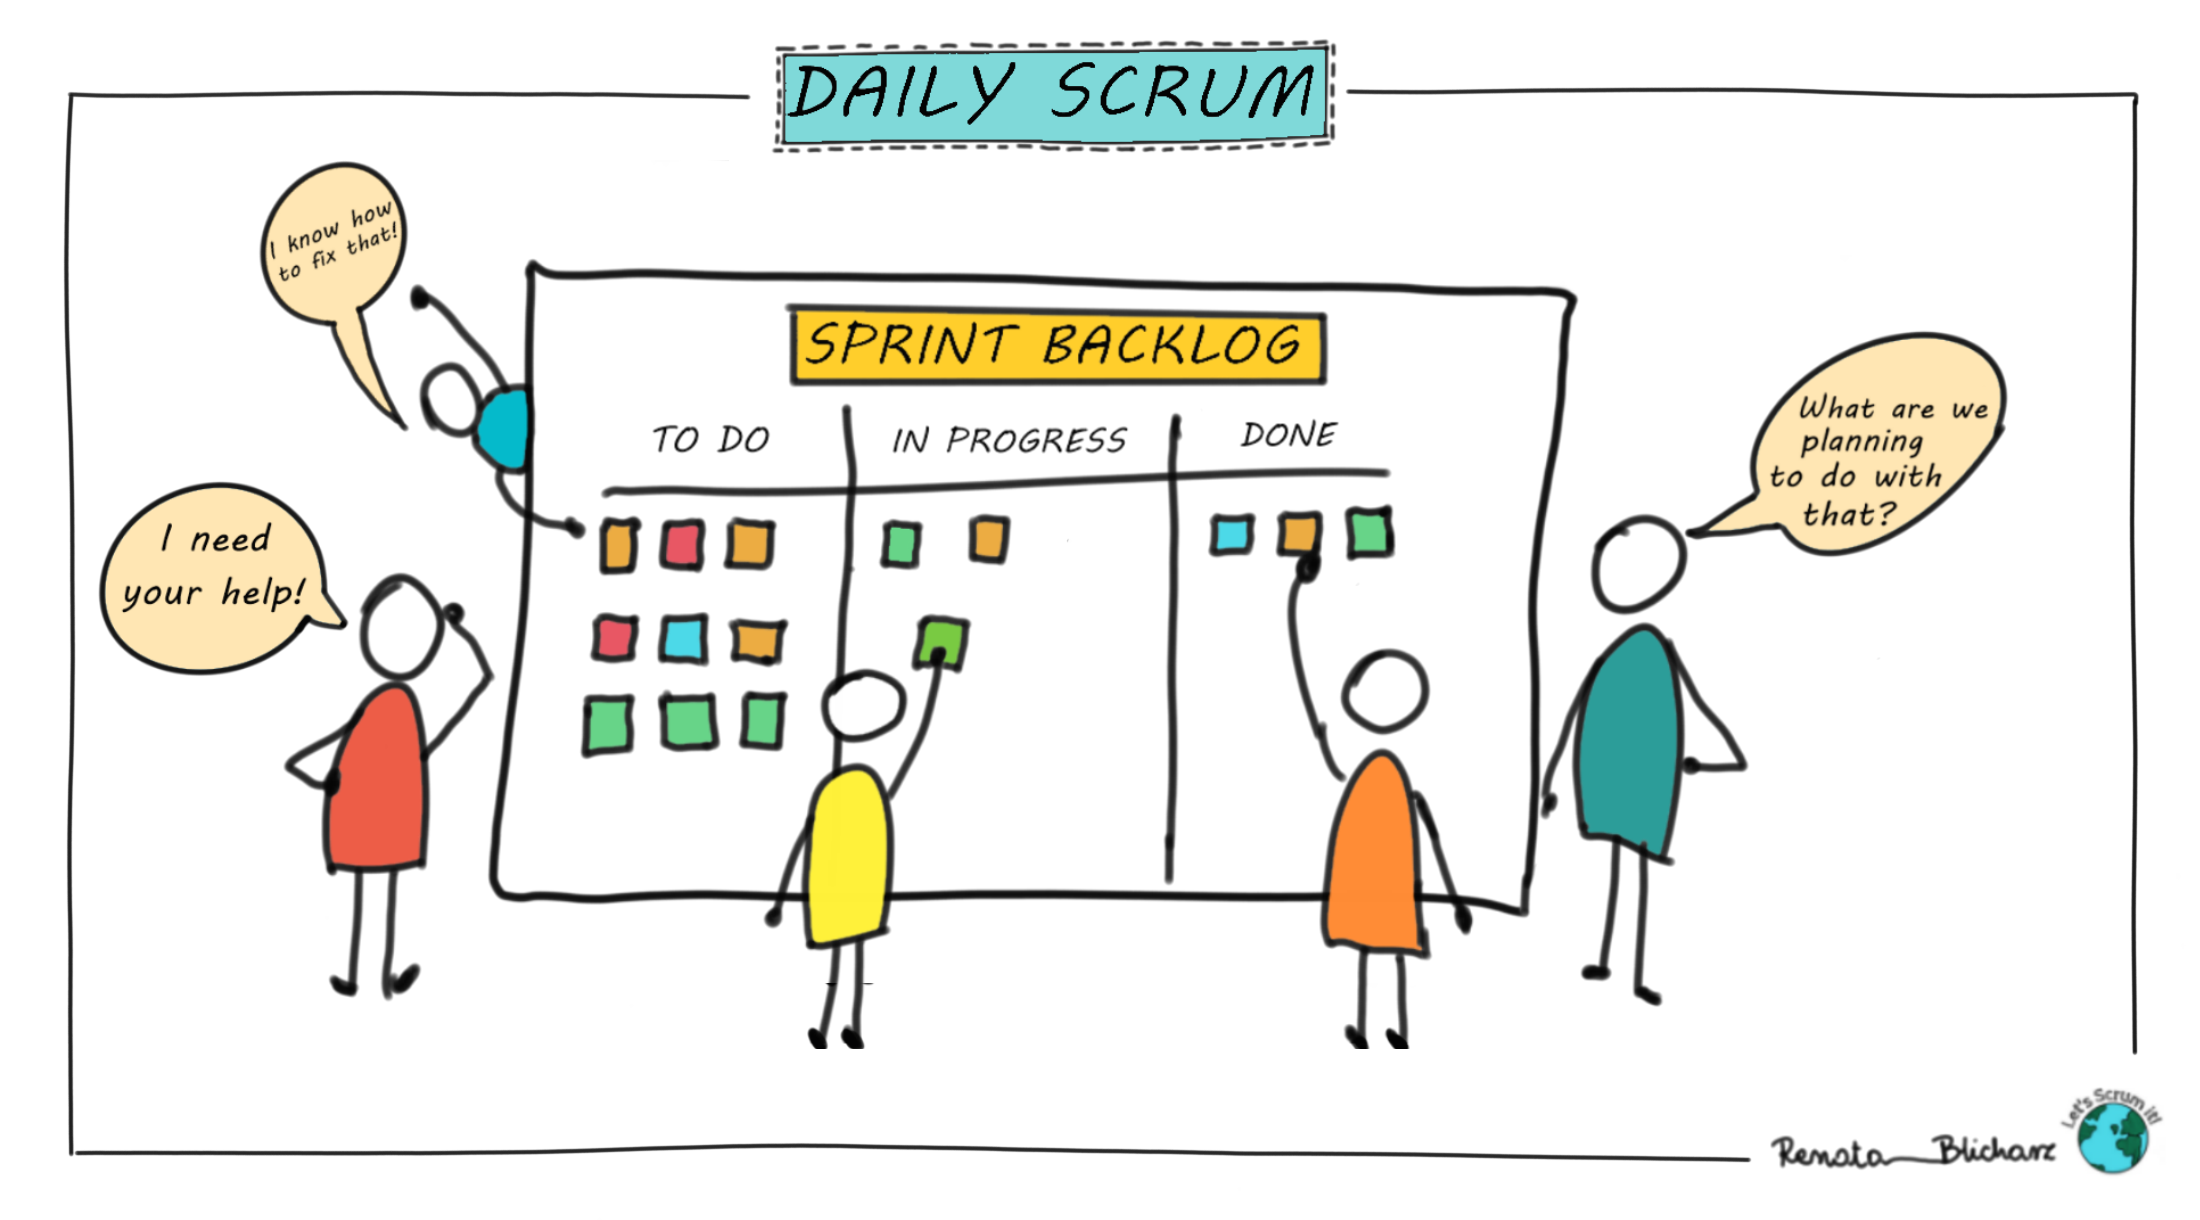 Scrum Events #3 Daily Scrum | Let's scrum it!